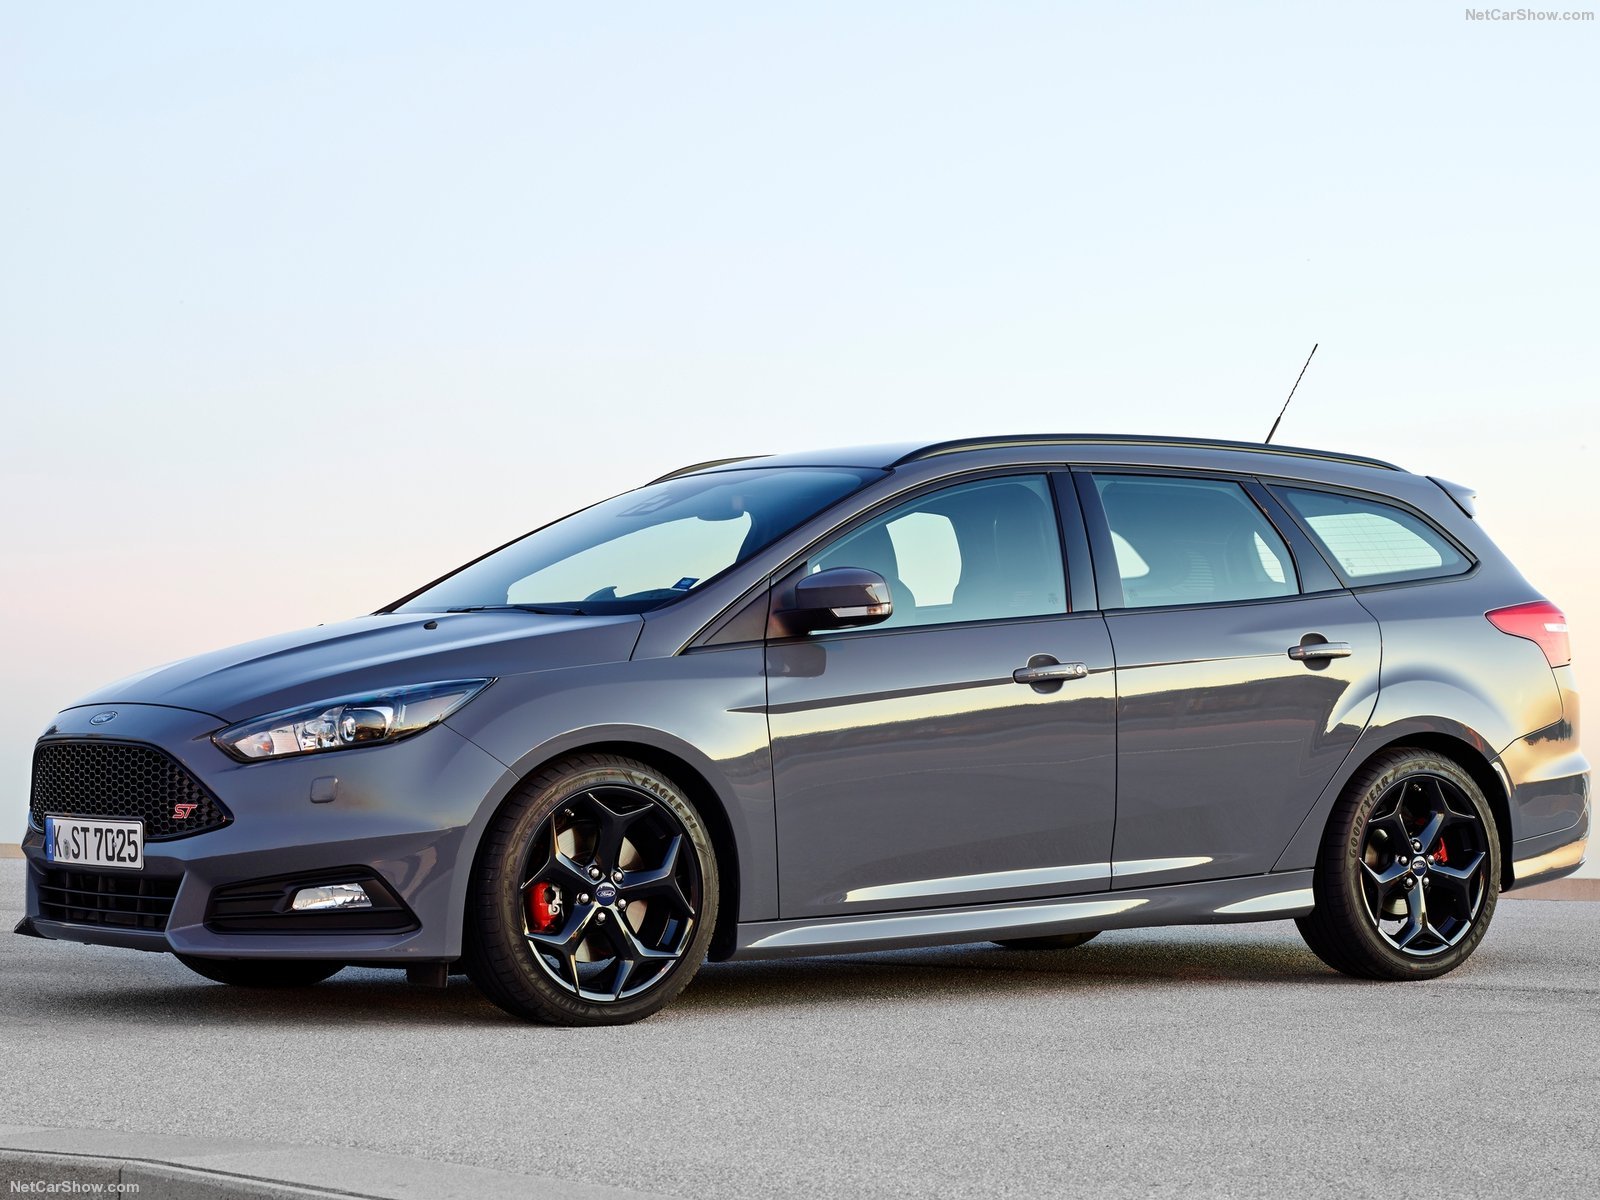 ford, Focus, St, Wagon, Cars, 2015 Wallpaper